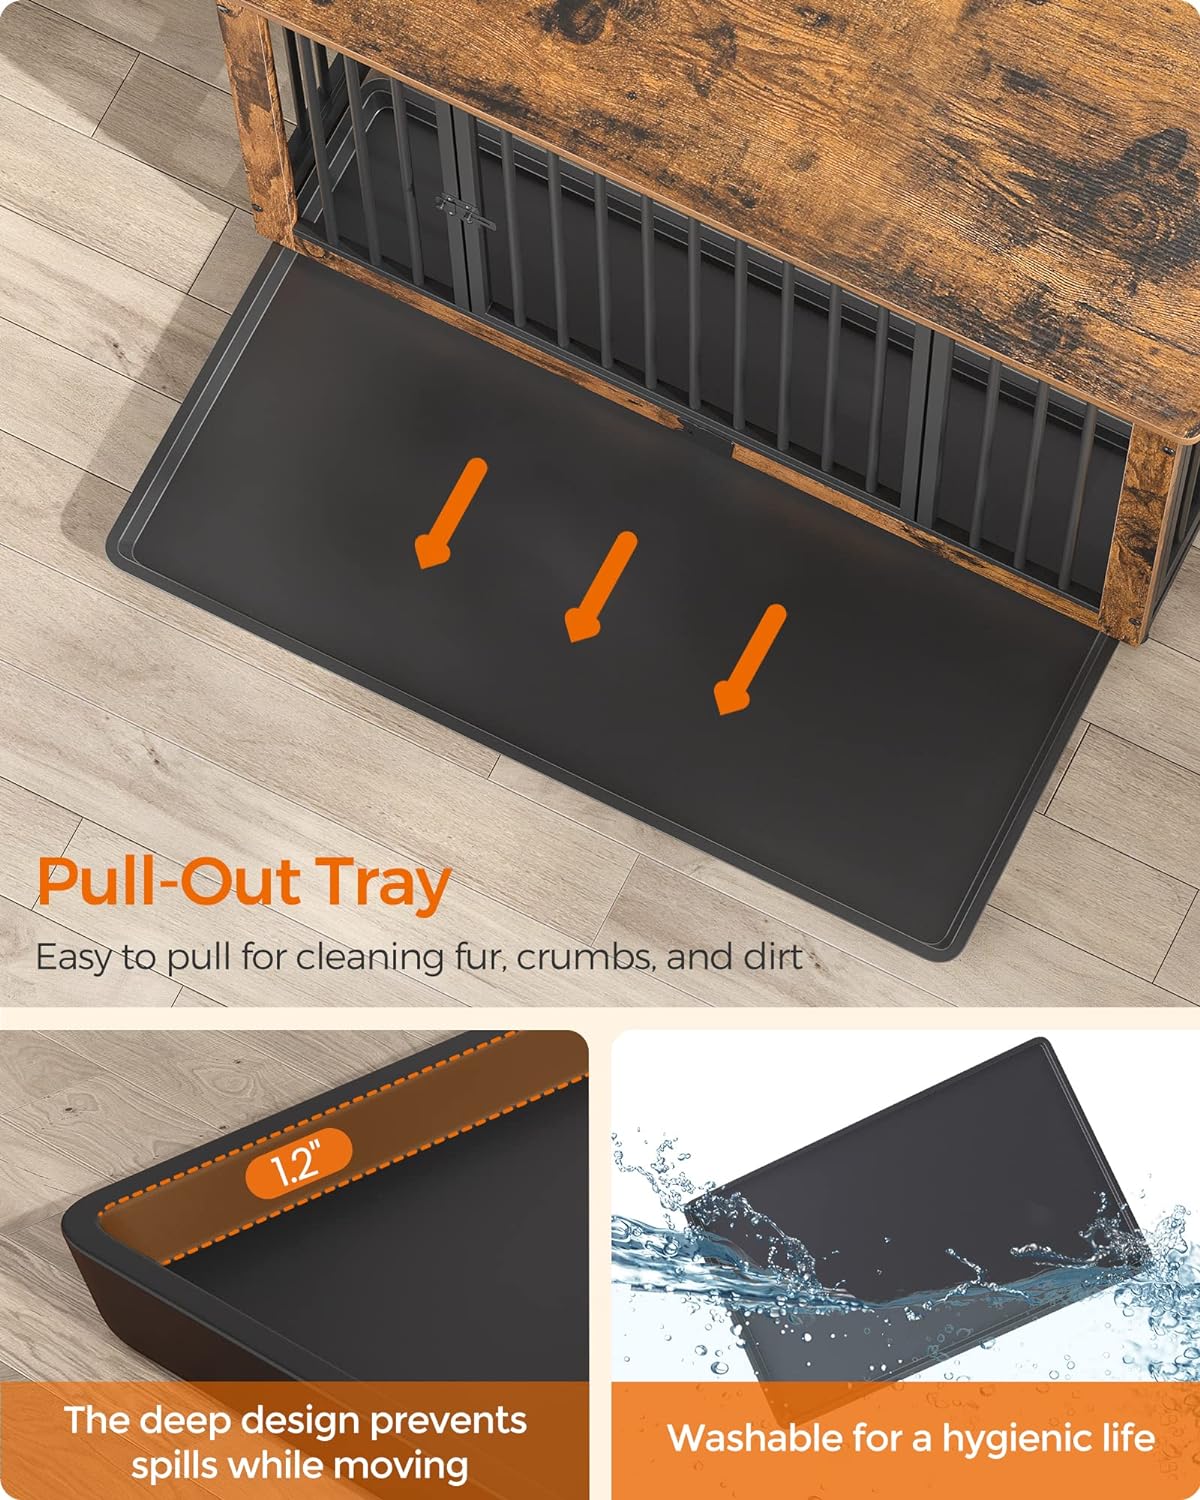 Dog crate with pull-out tray